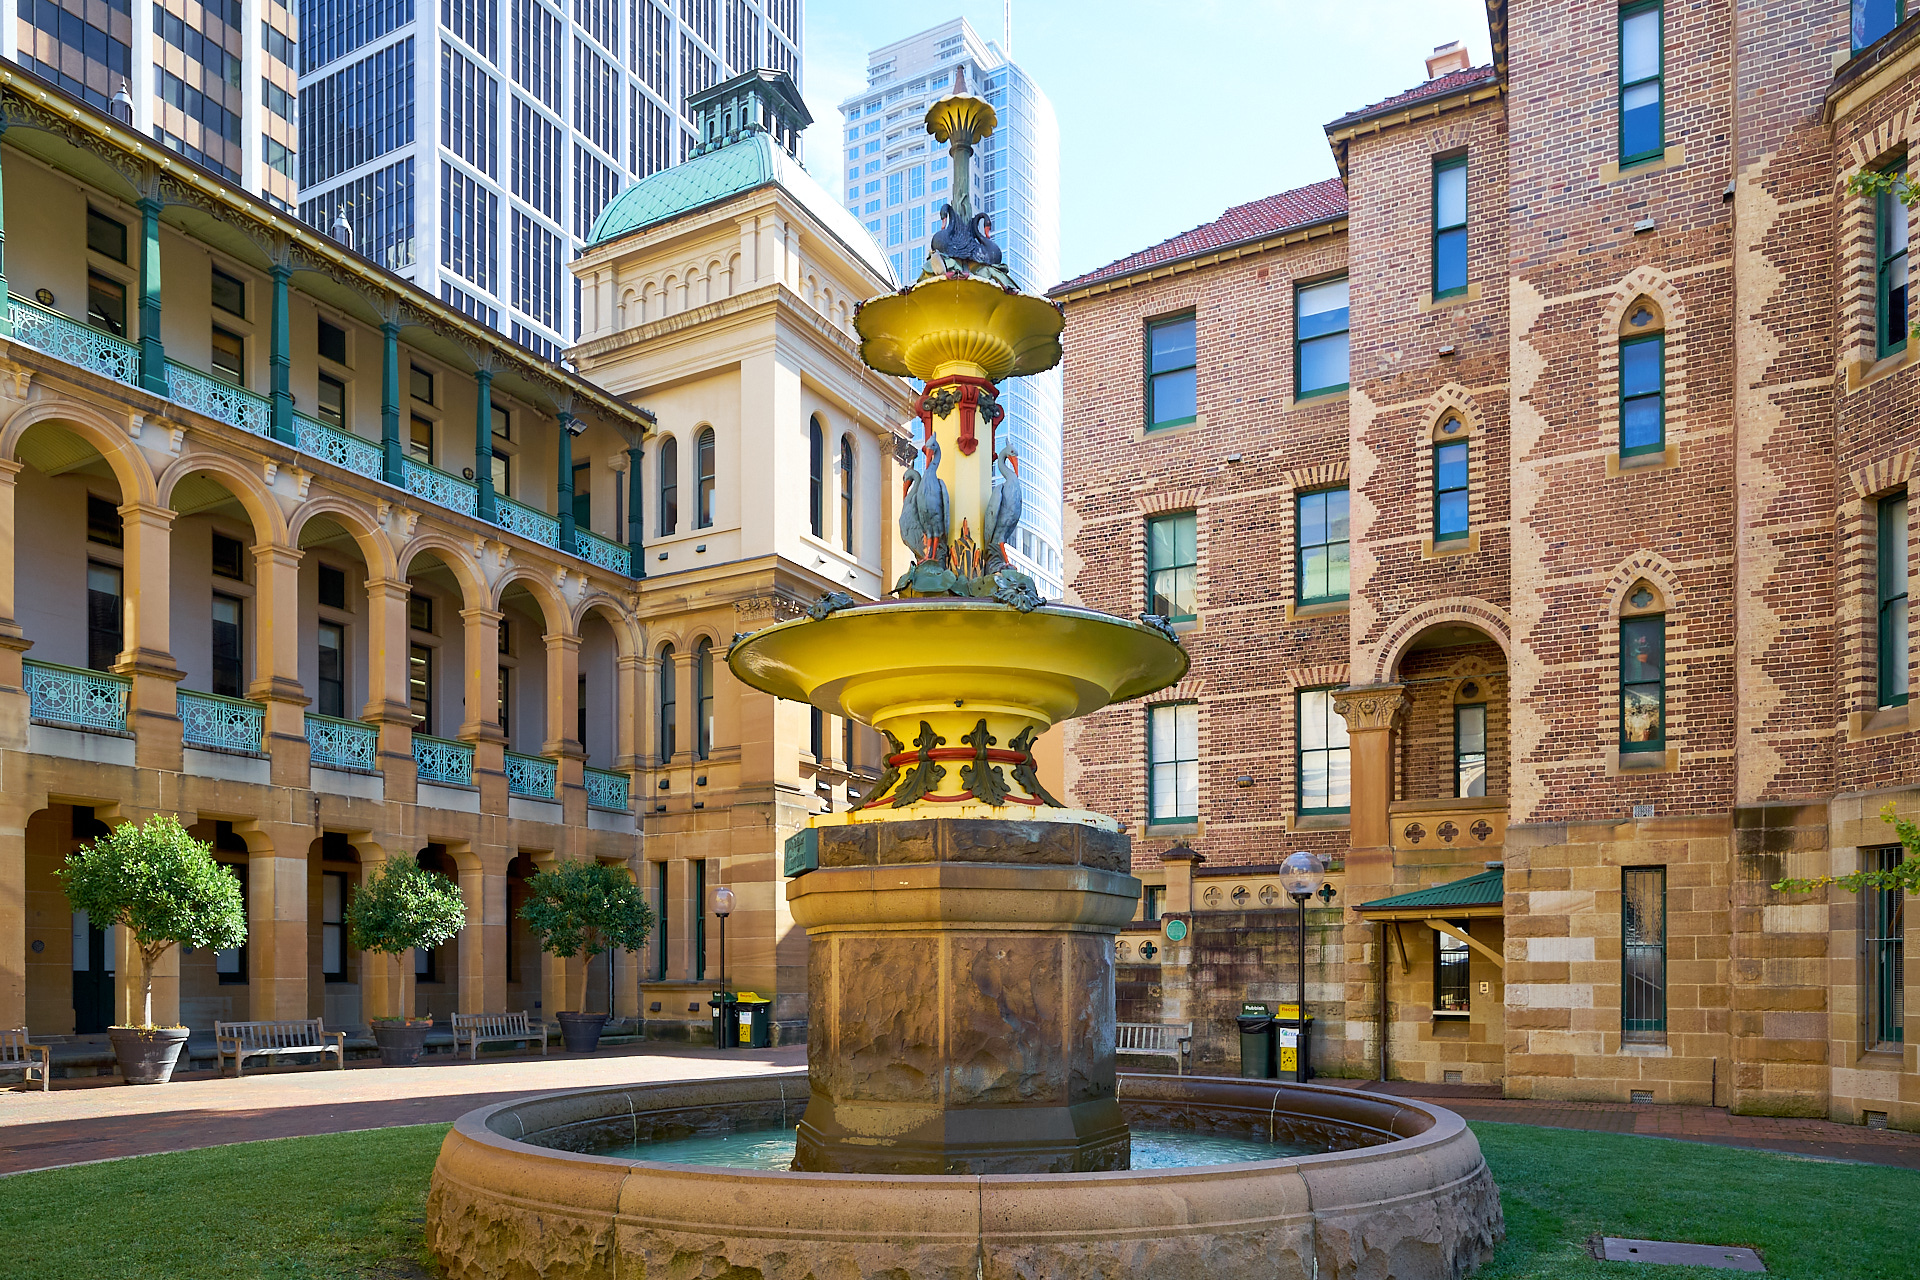 Sydney Hospital, Robert Brough Memorial Fountain Architecture Photo. Victorian architecture. Photography By orlandosydney.com